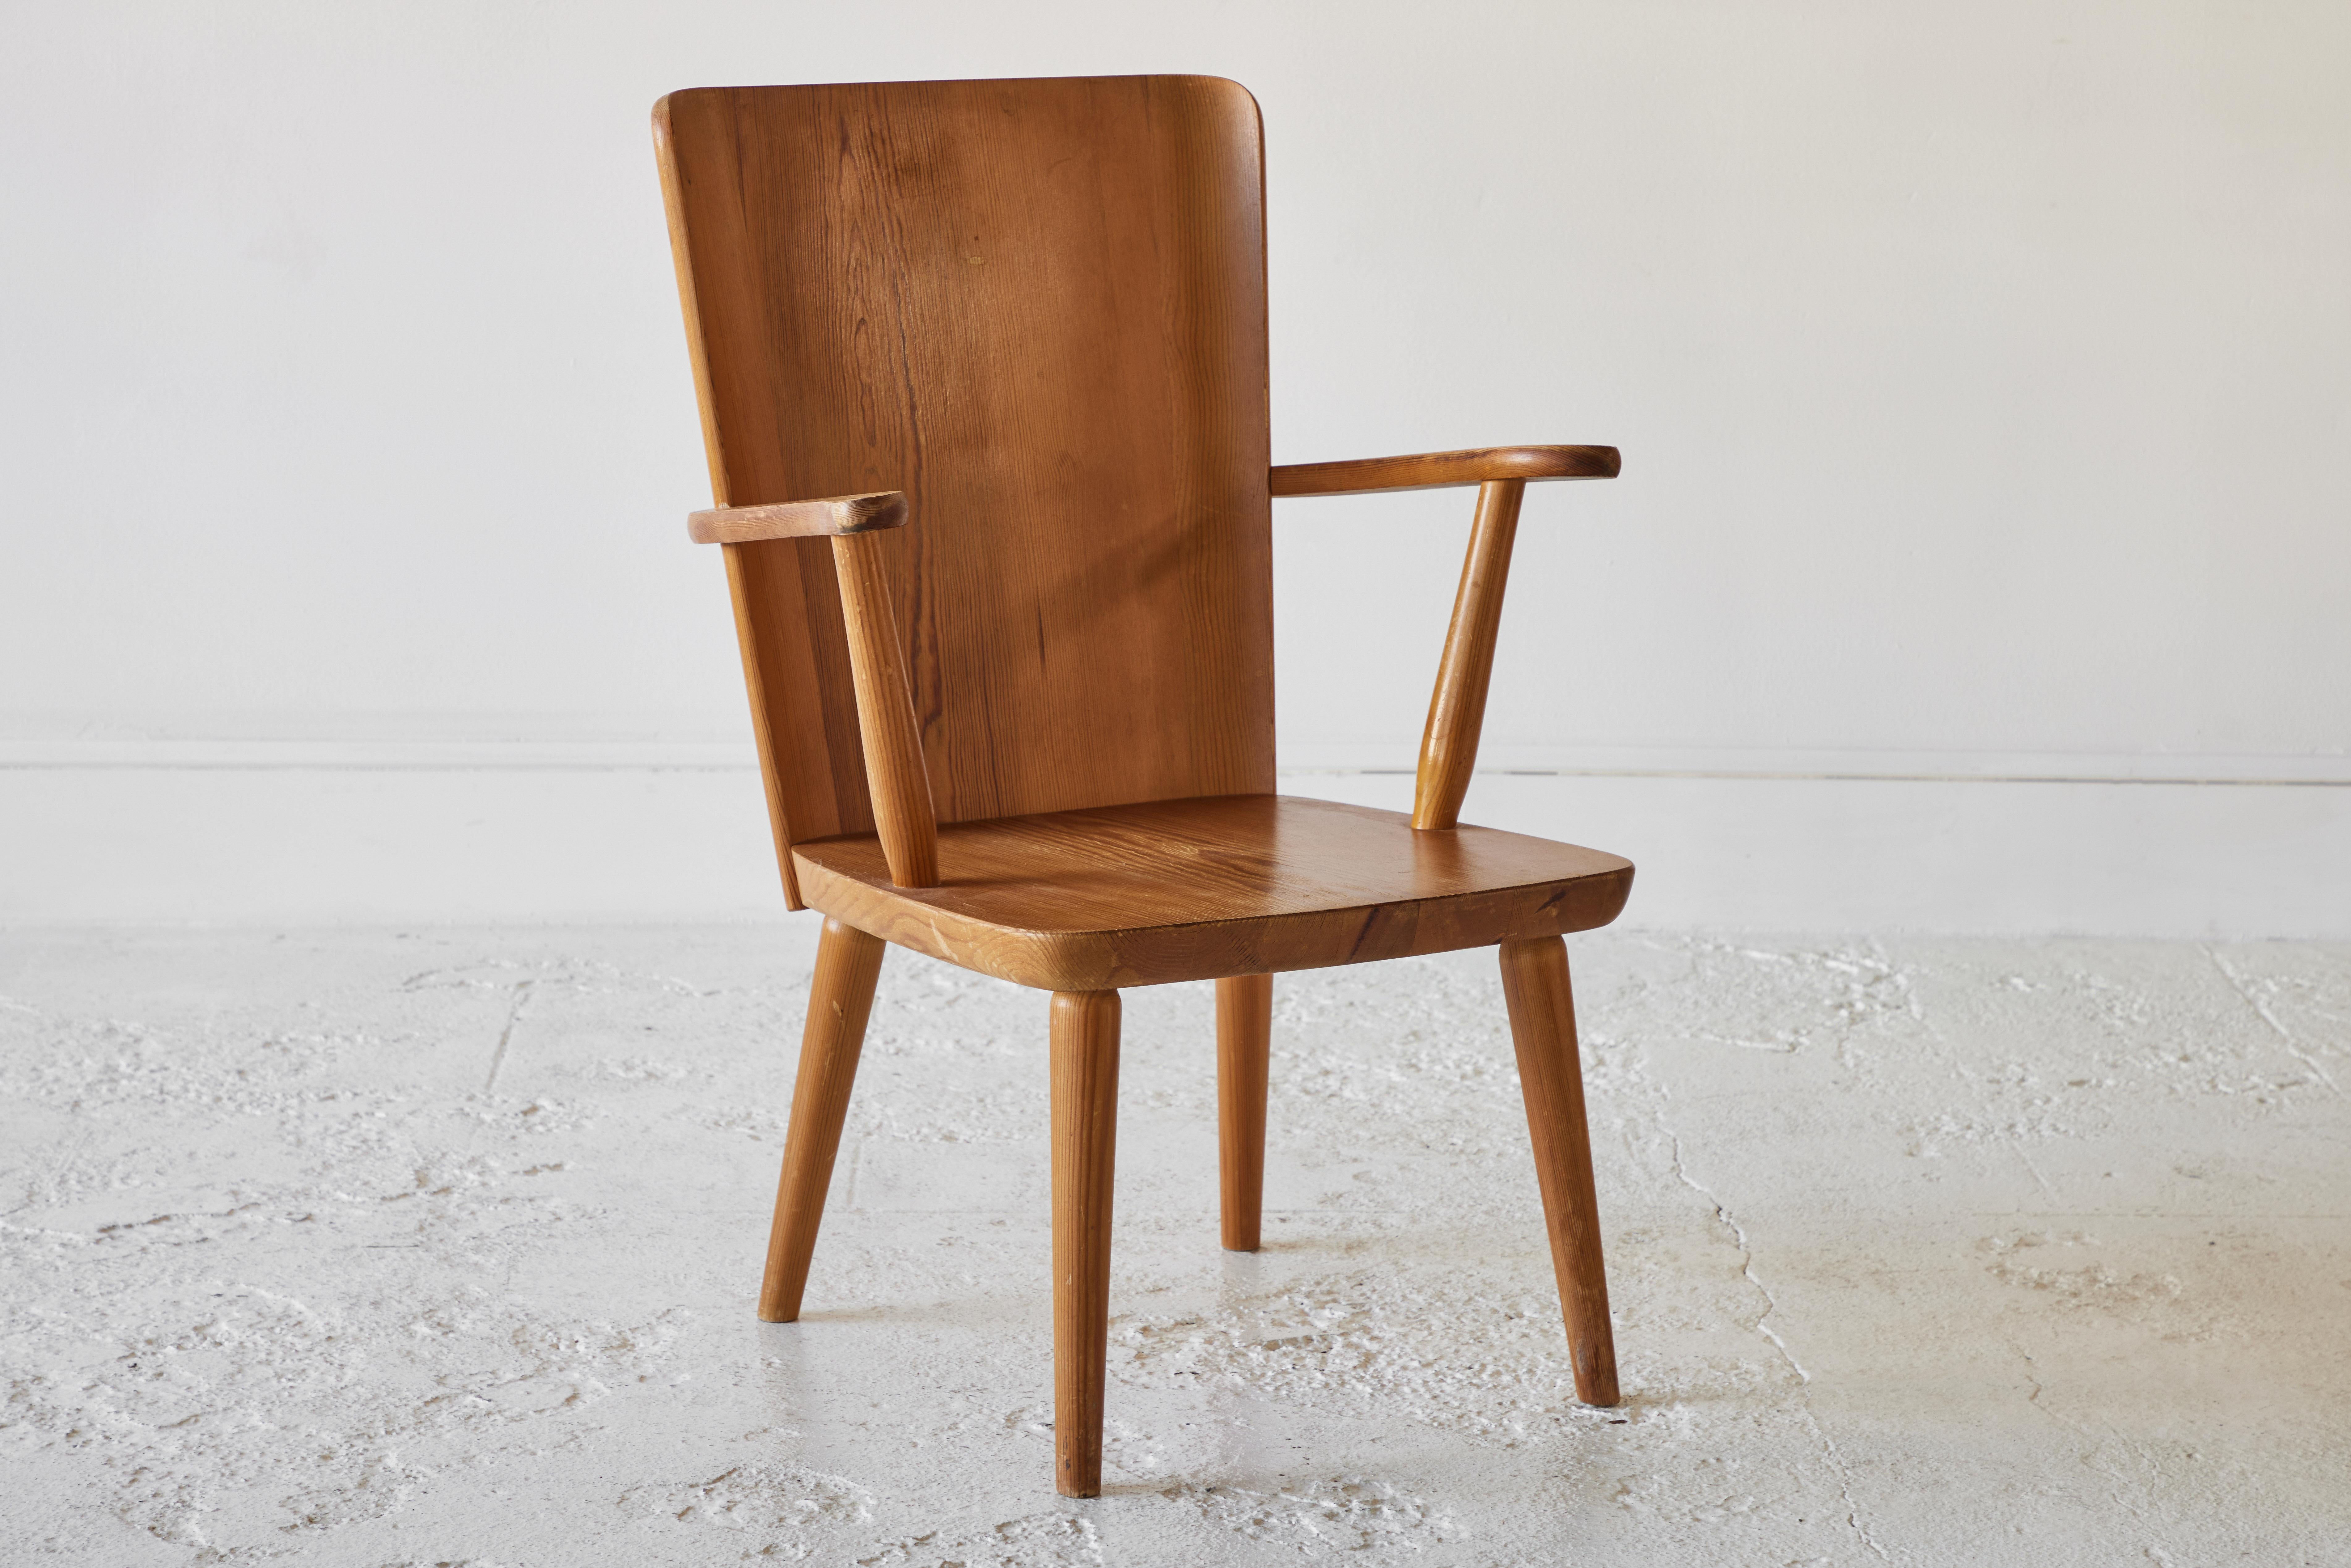 20th Century Pair of Pine Chairs by Goran Malmvall for Karl Andersson & Söner, Sweden